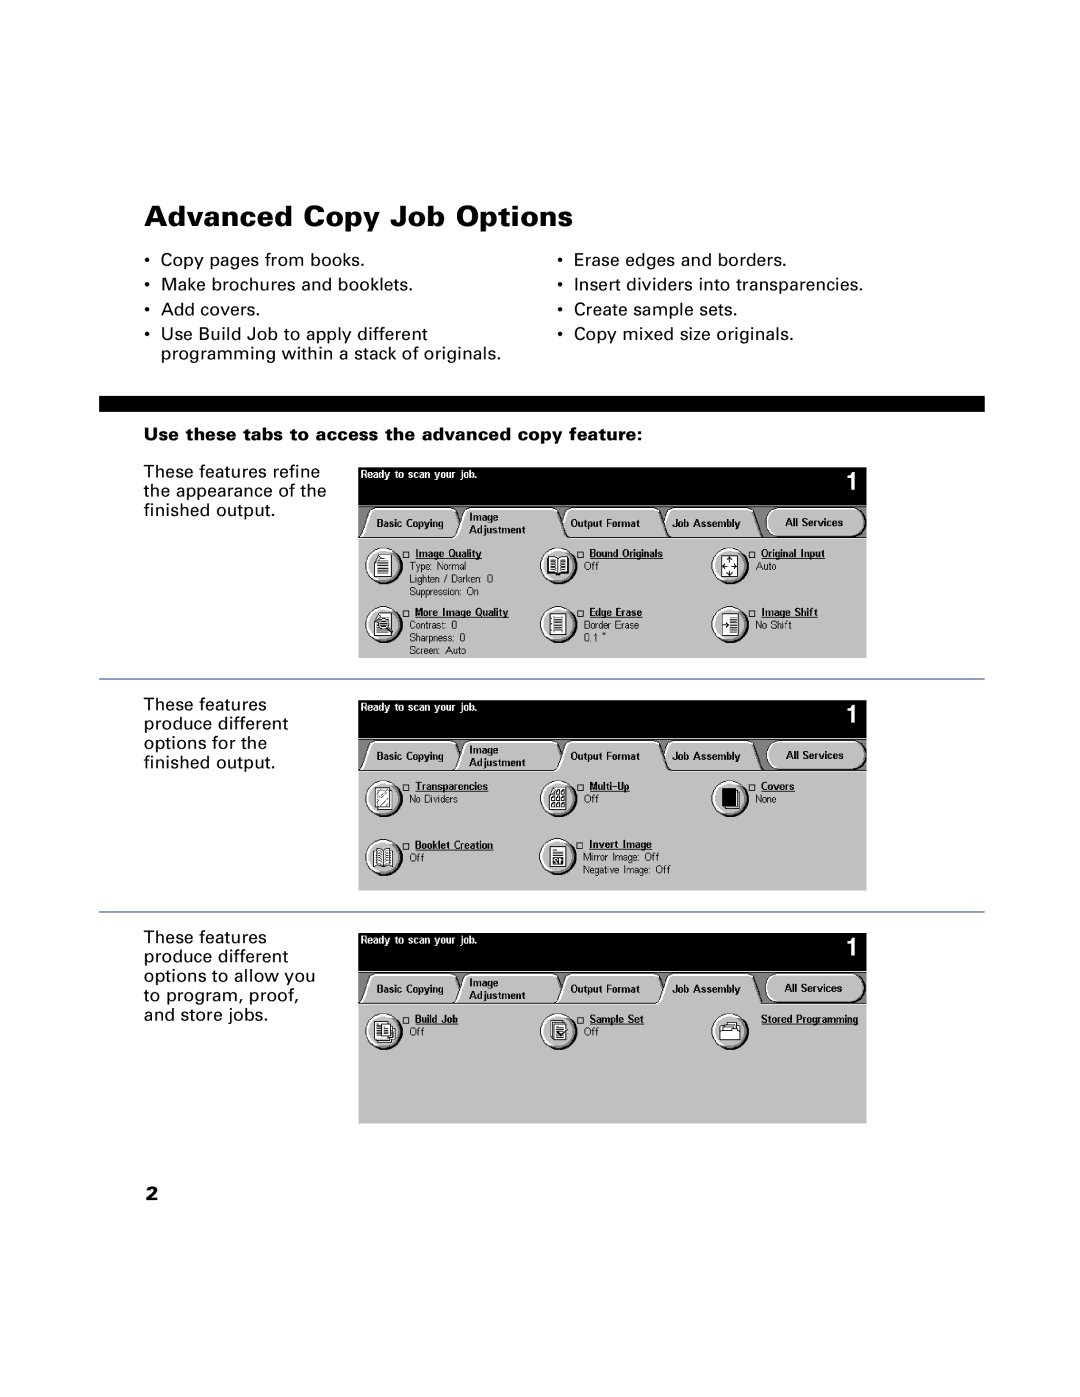 Xerox C75, C90, C65 manual Advanced Copy Job Options, Use these tabs to access the advanced copy feature 